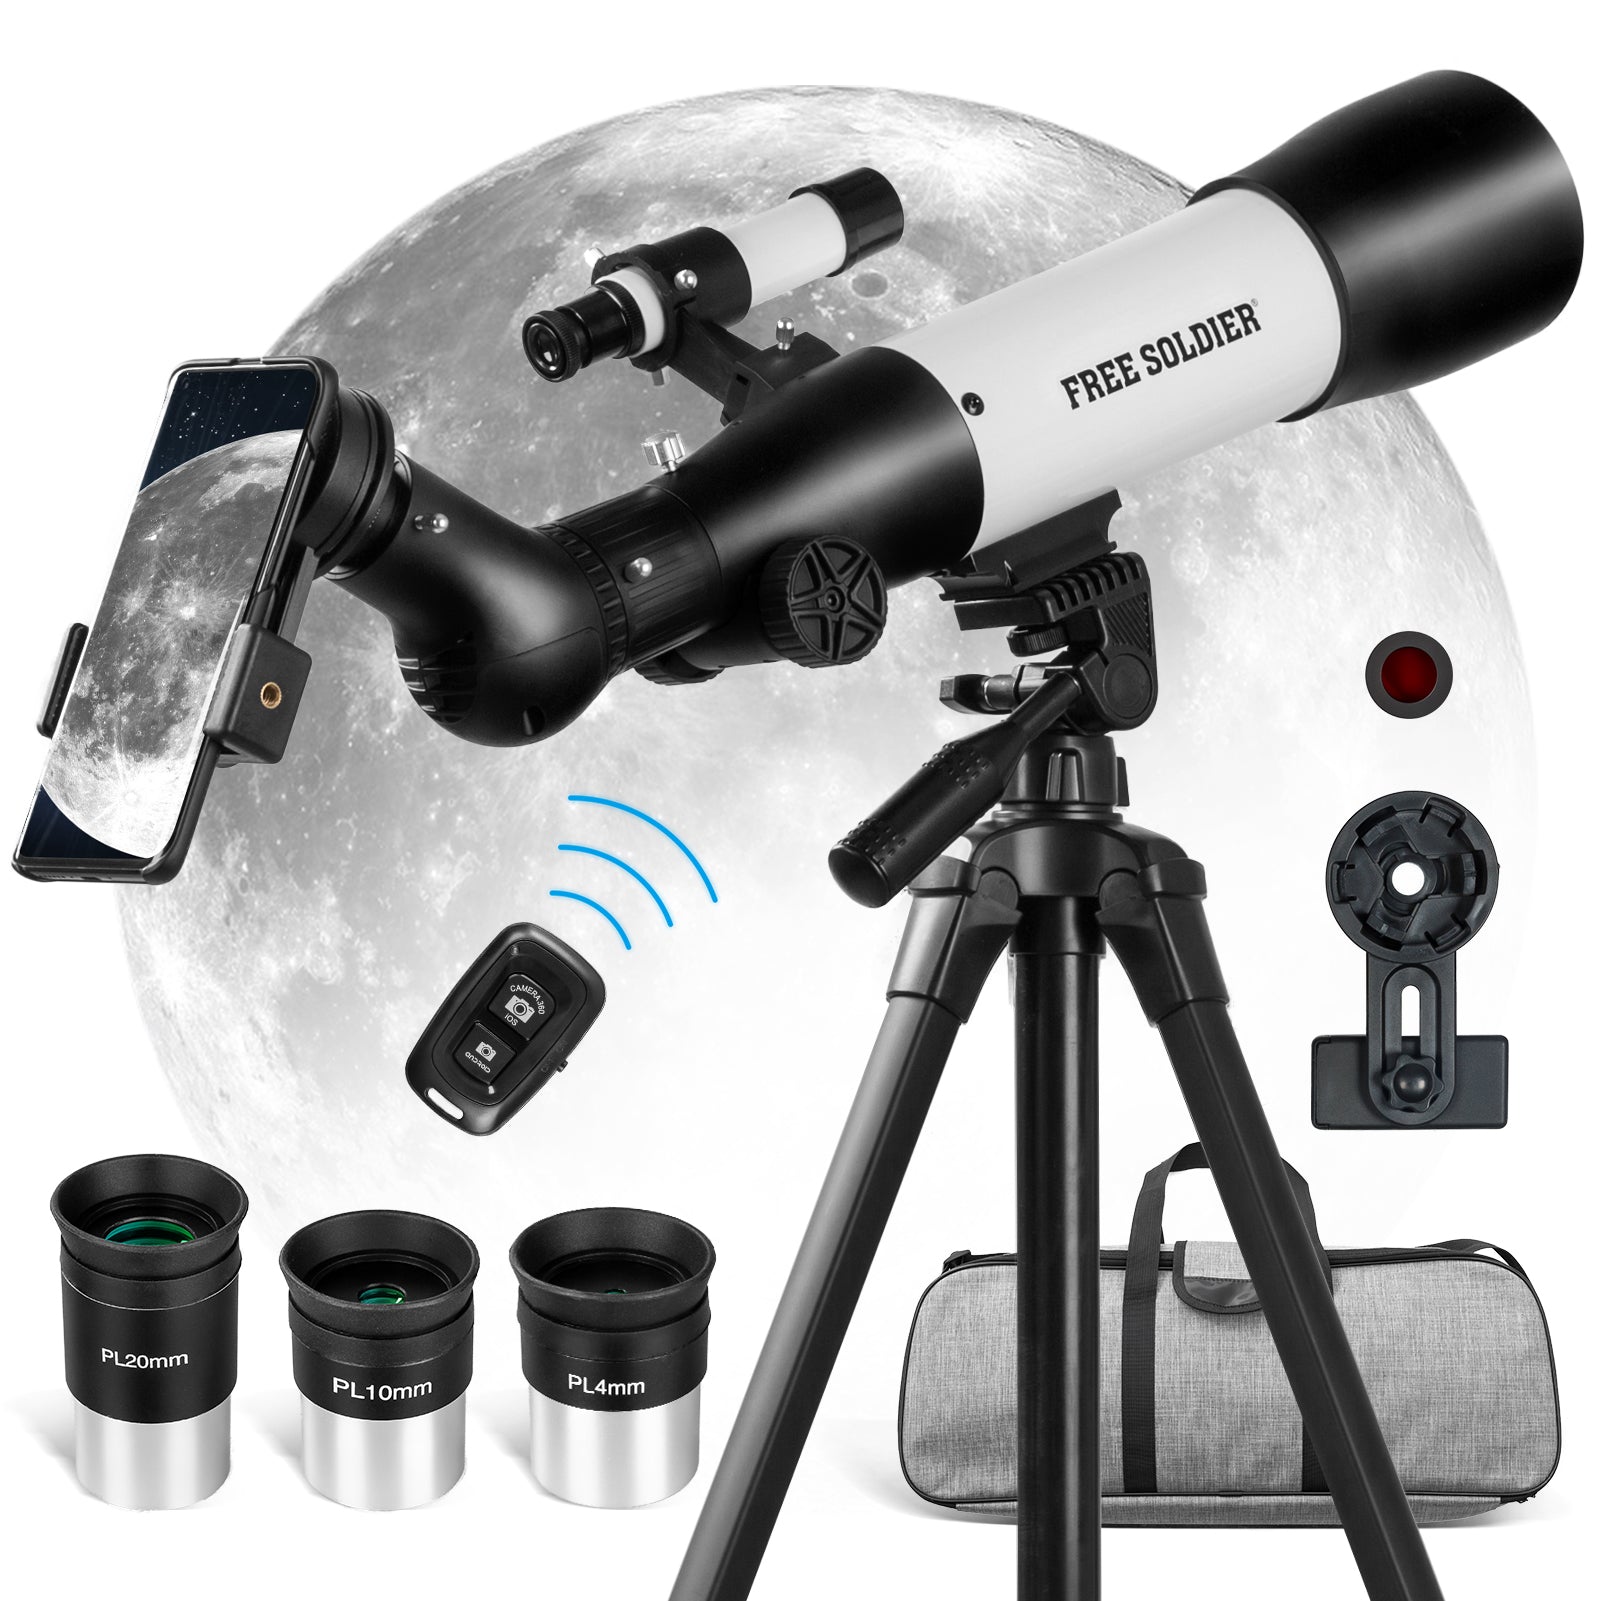 Free Soldier Telescope - 70mm Aperture 500mm Focus Length - Astronomy  Telescope for Kids & Adults